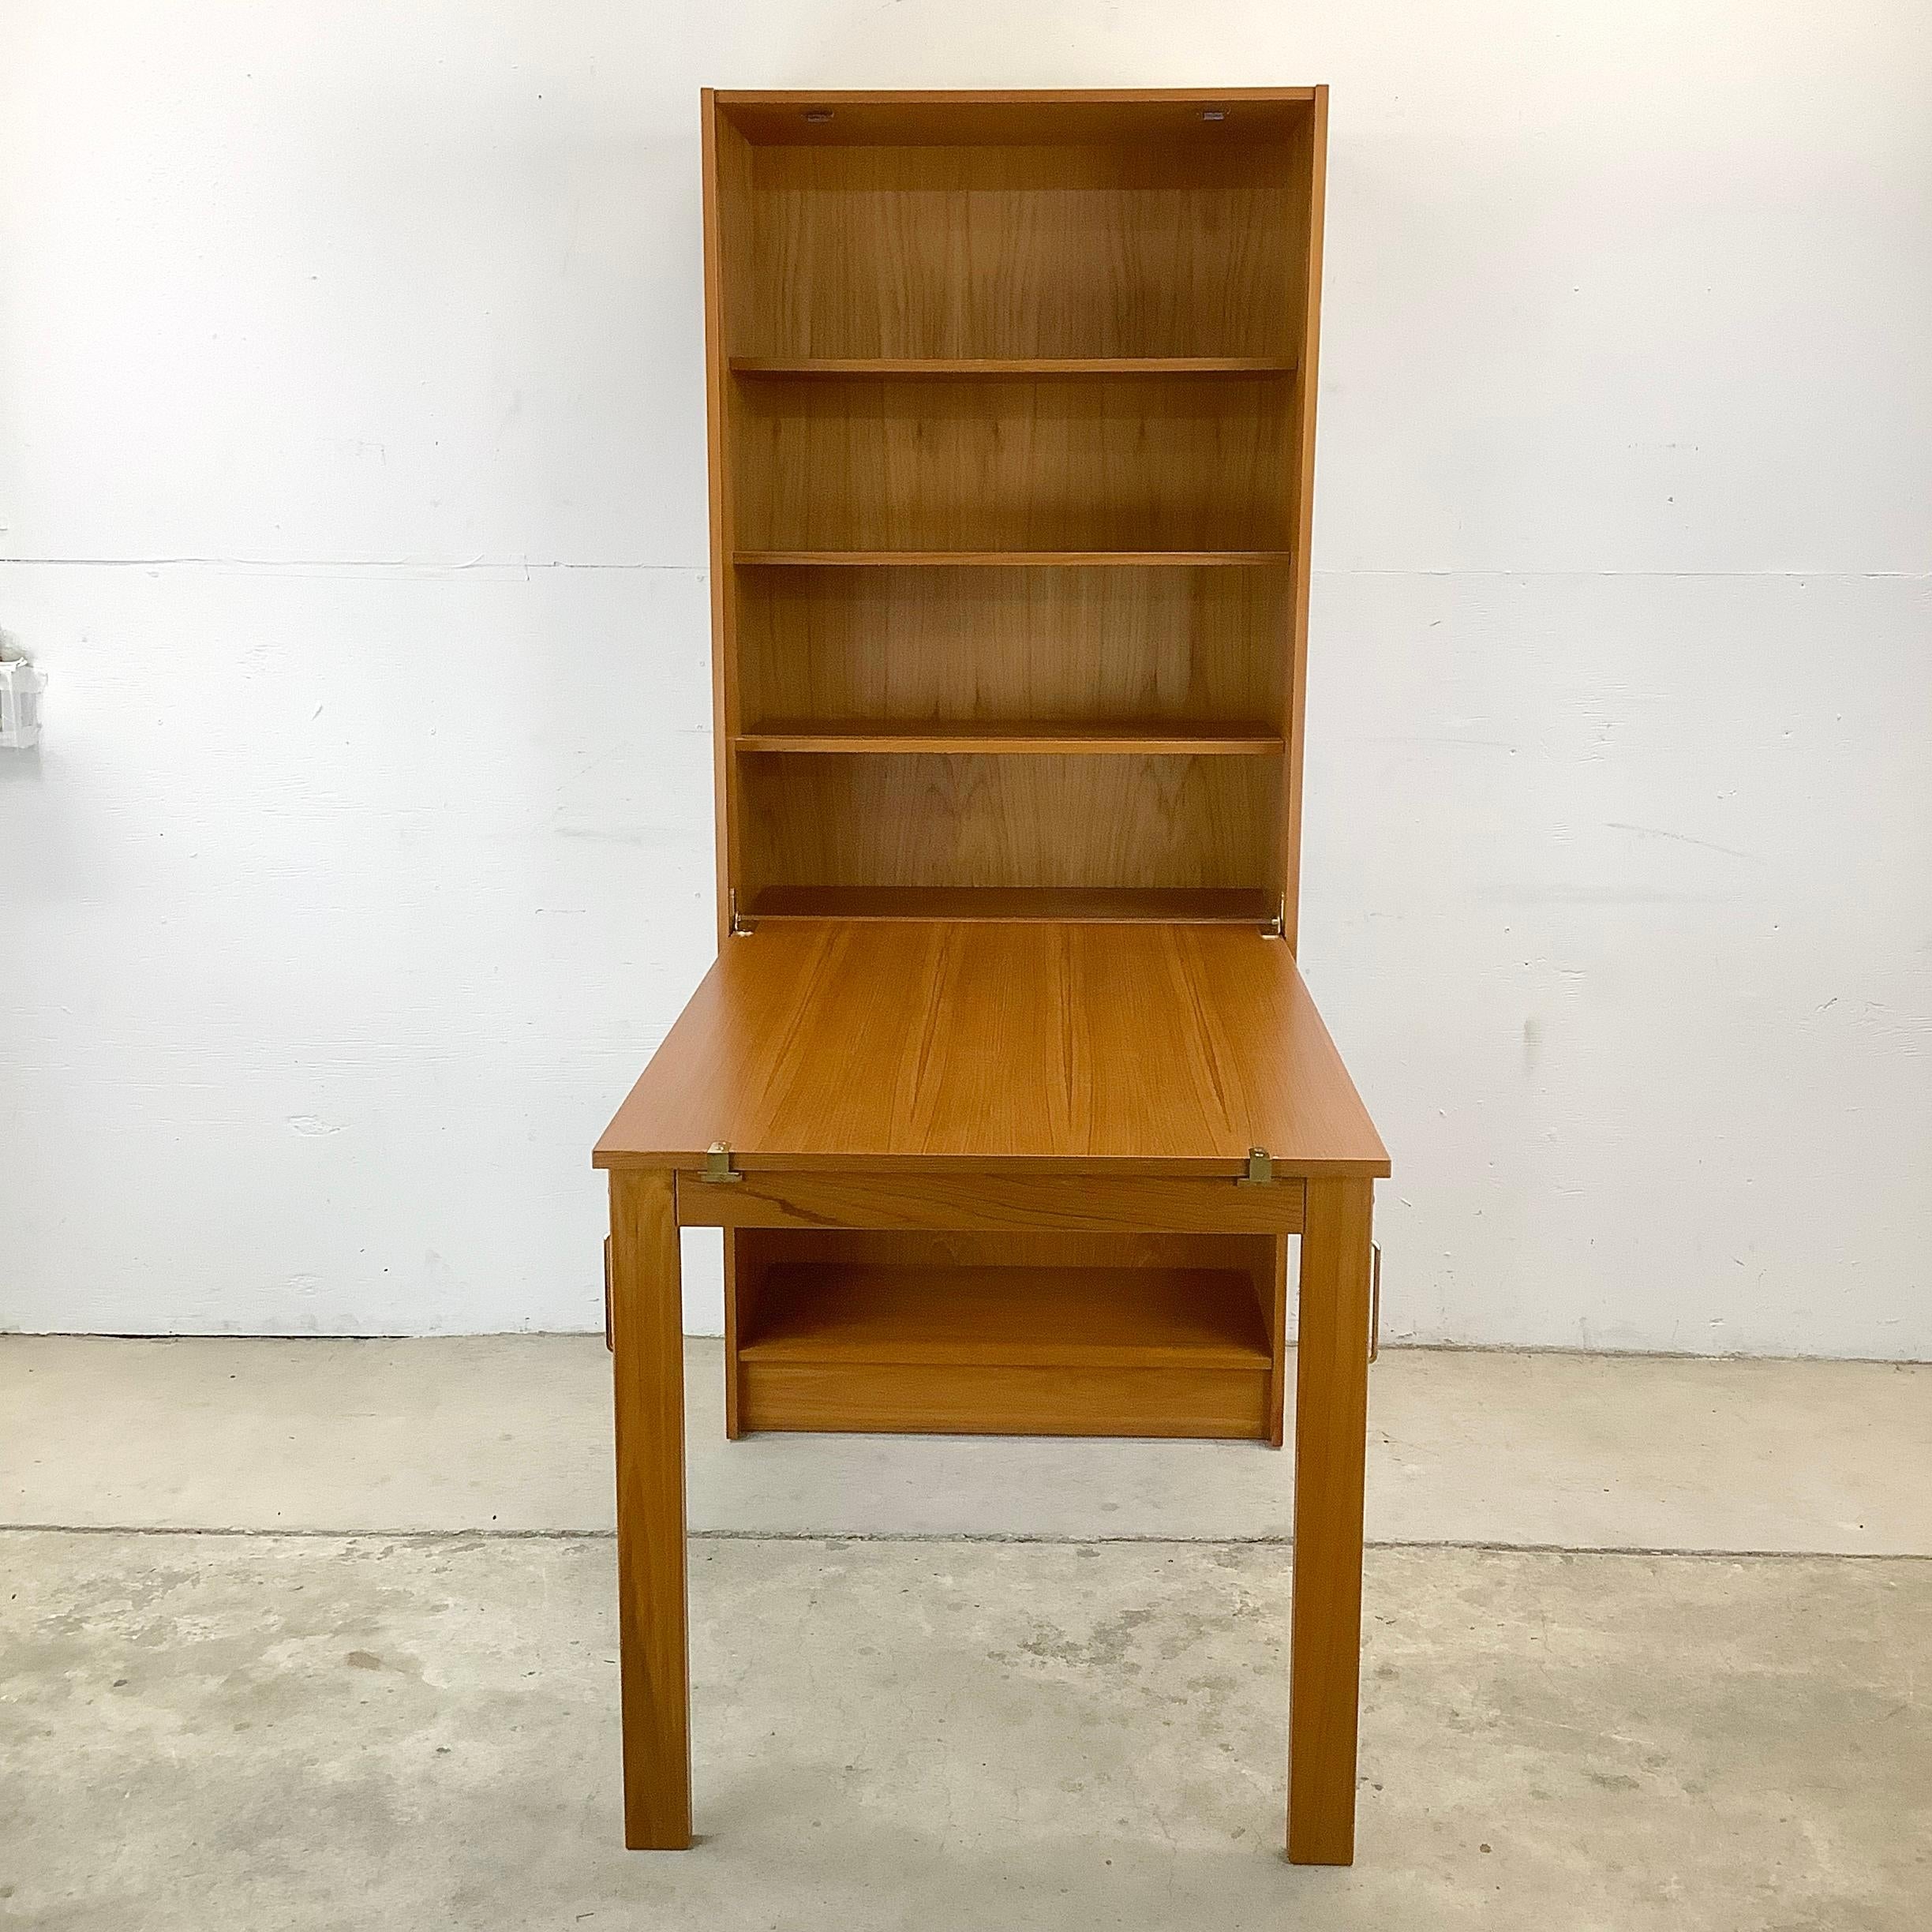 Add character and mid-century appeal to any workspace with this Scandinavian modern teak bookshelf with drop-front desk, a dual-function marvel that brings the elegance of Danish design to your home. With its rich, warm hues and cleverly integrated